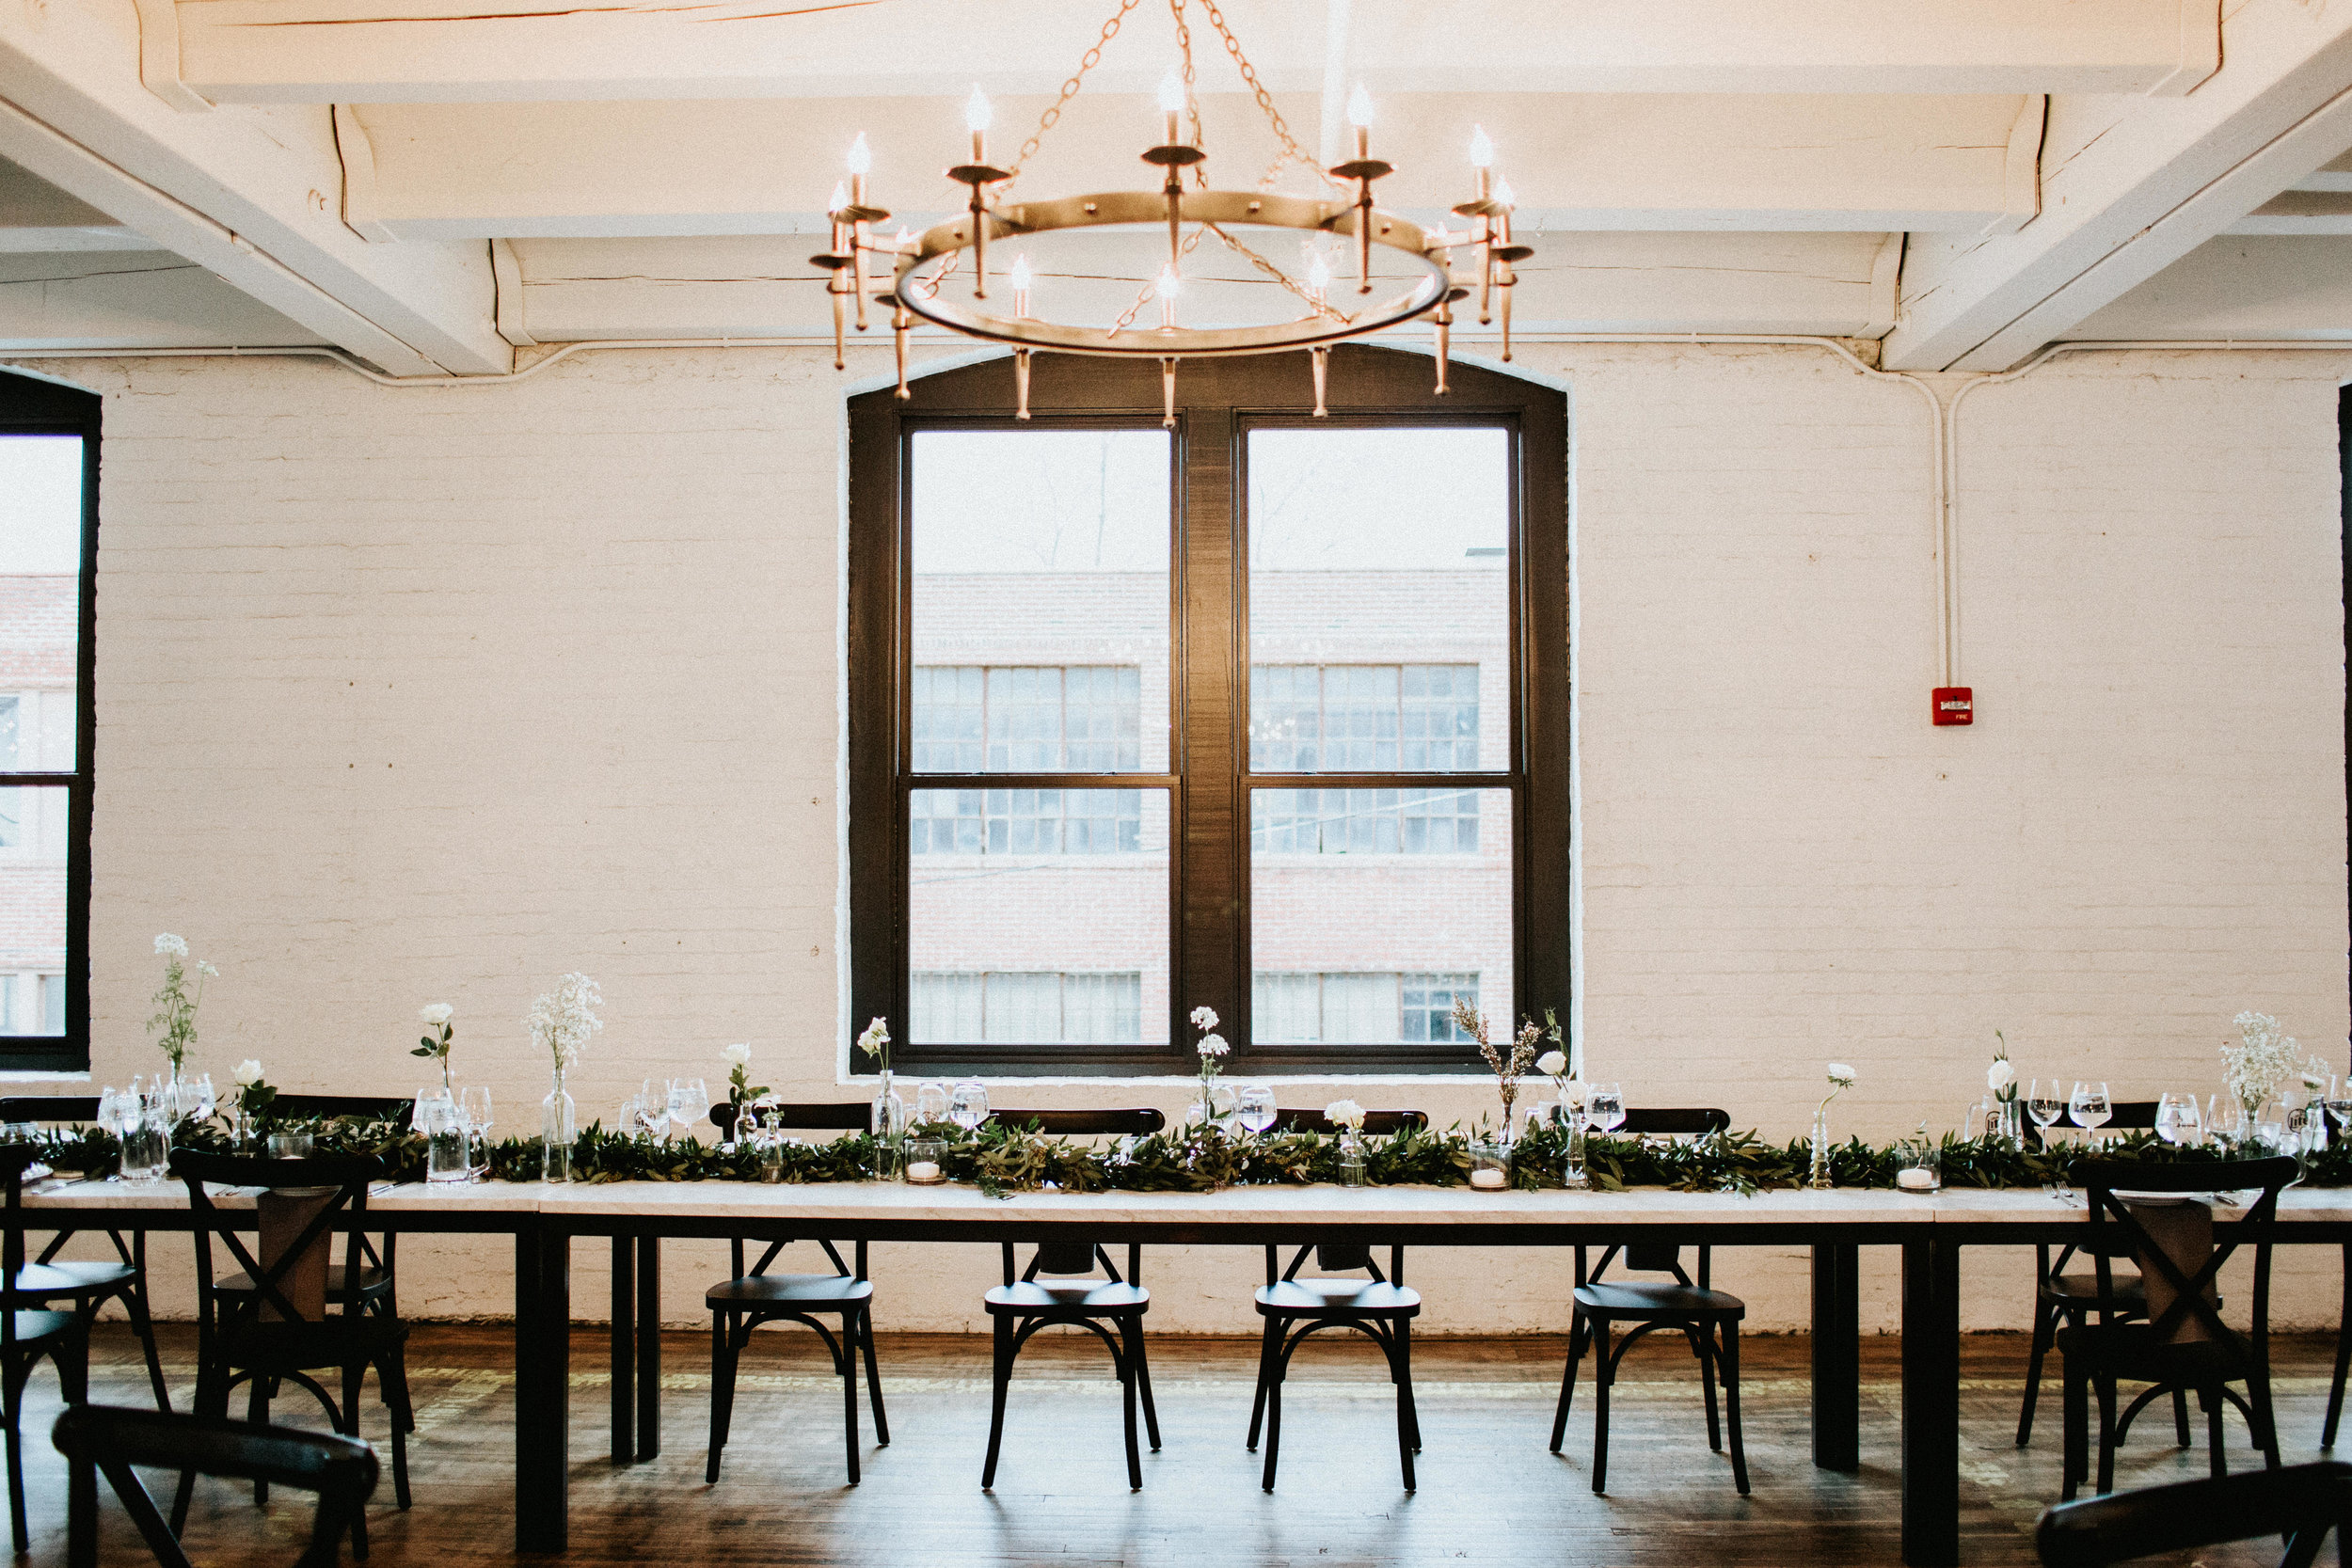 Lauren + Jimmy's City Loft Dream Day — CHI thee WED